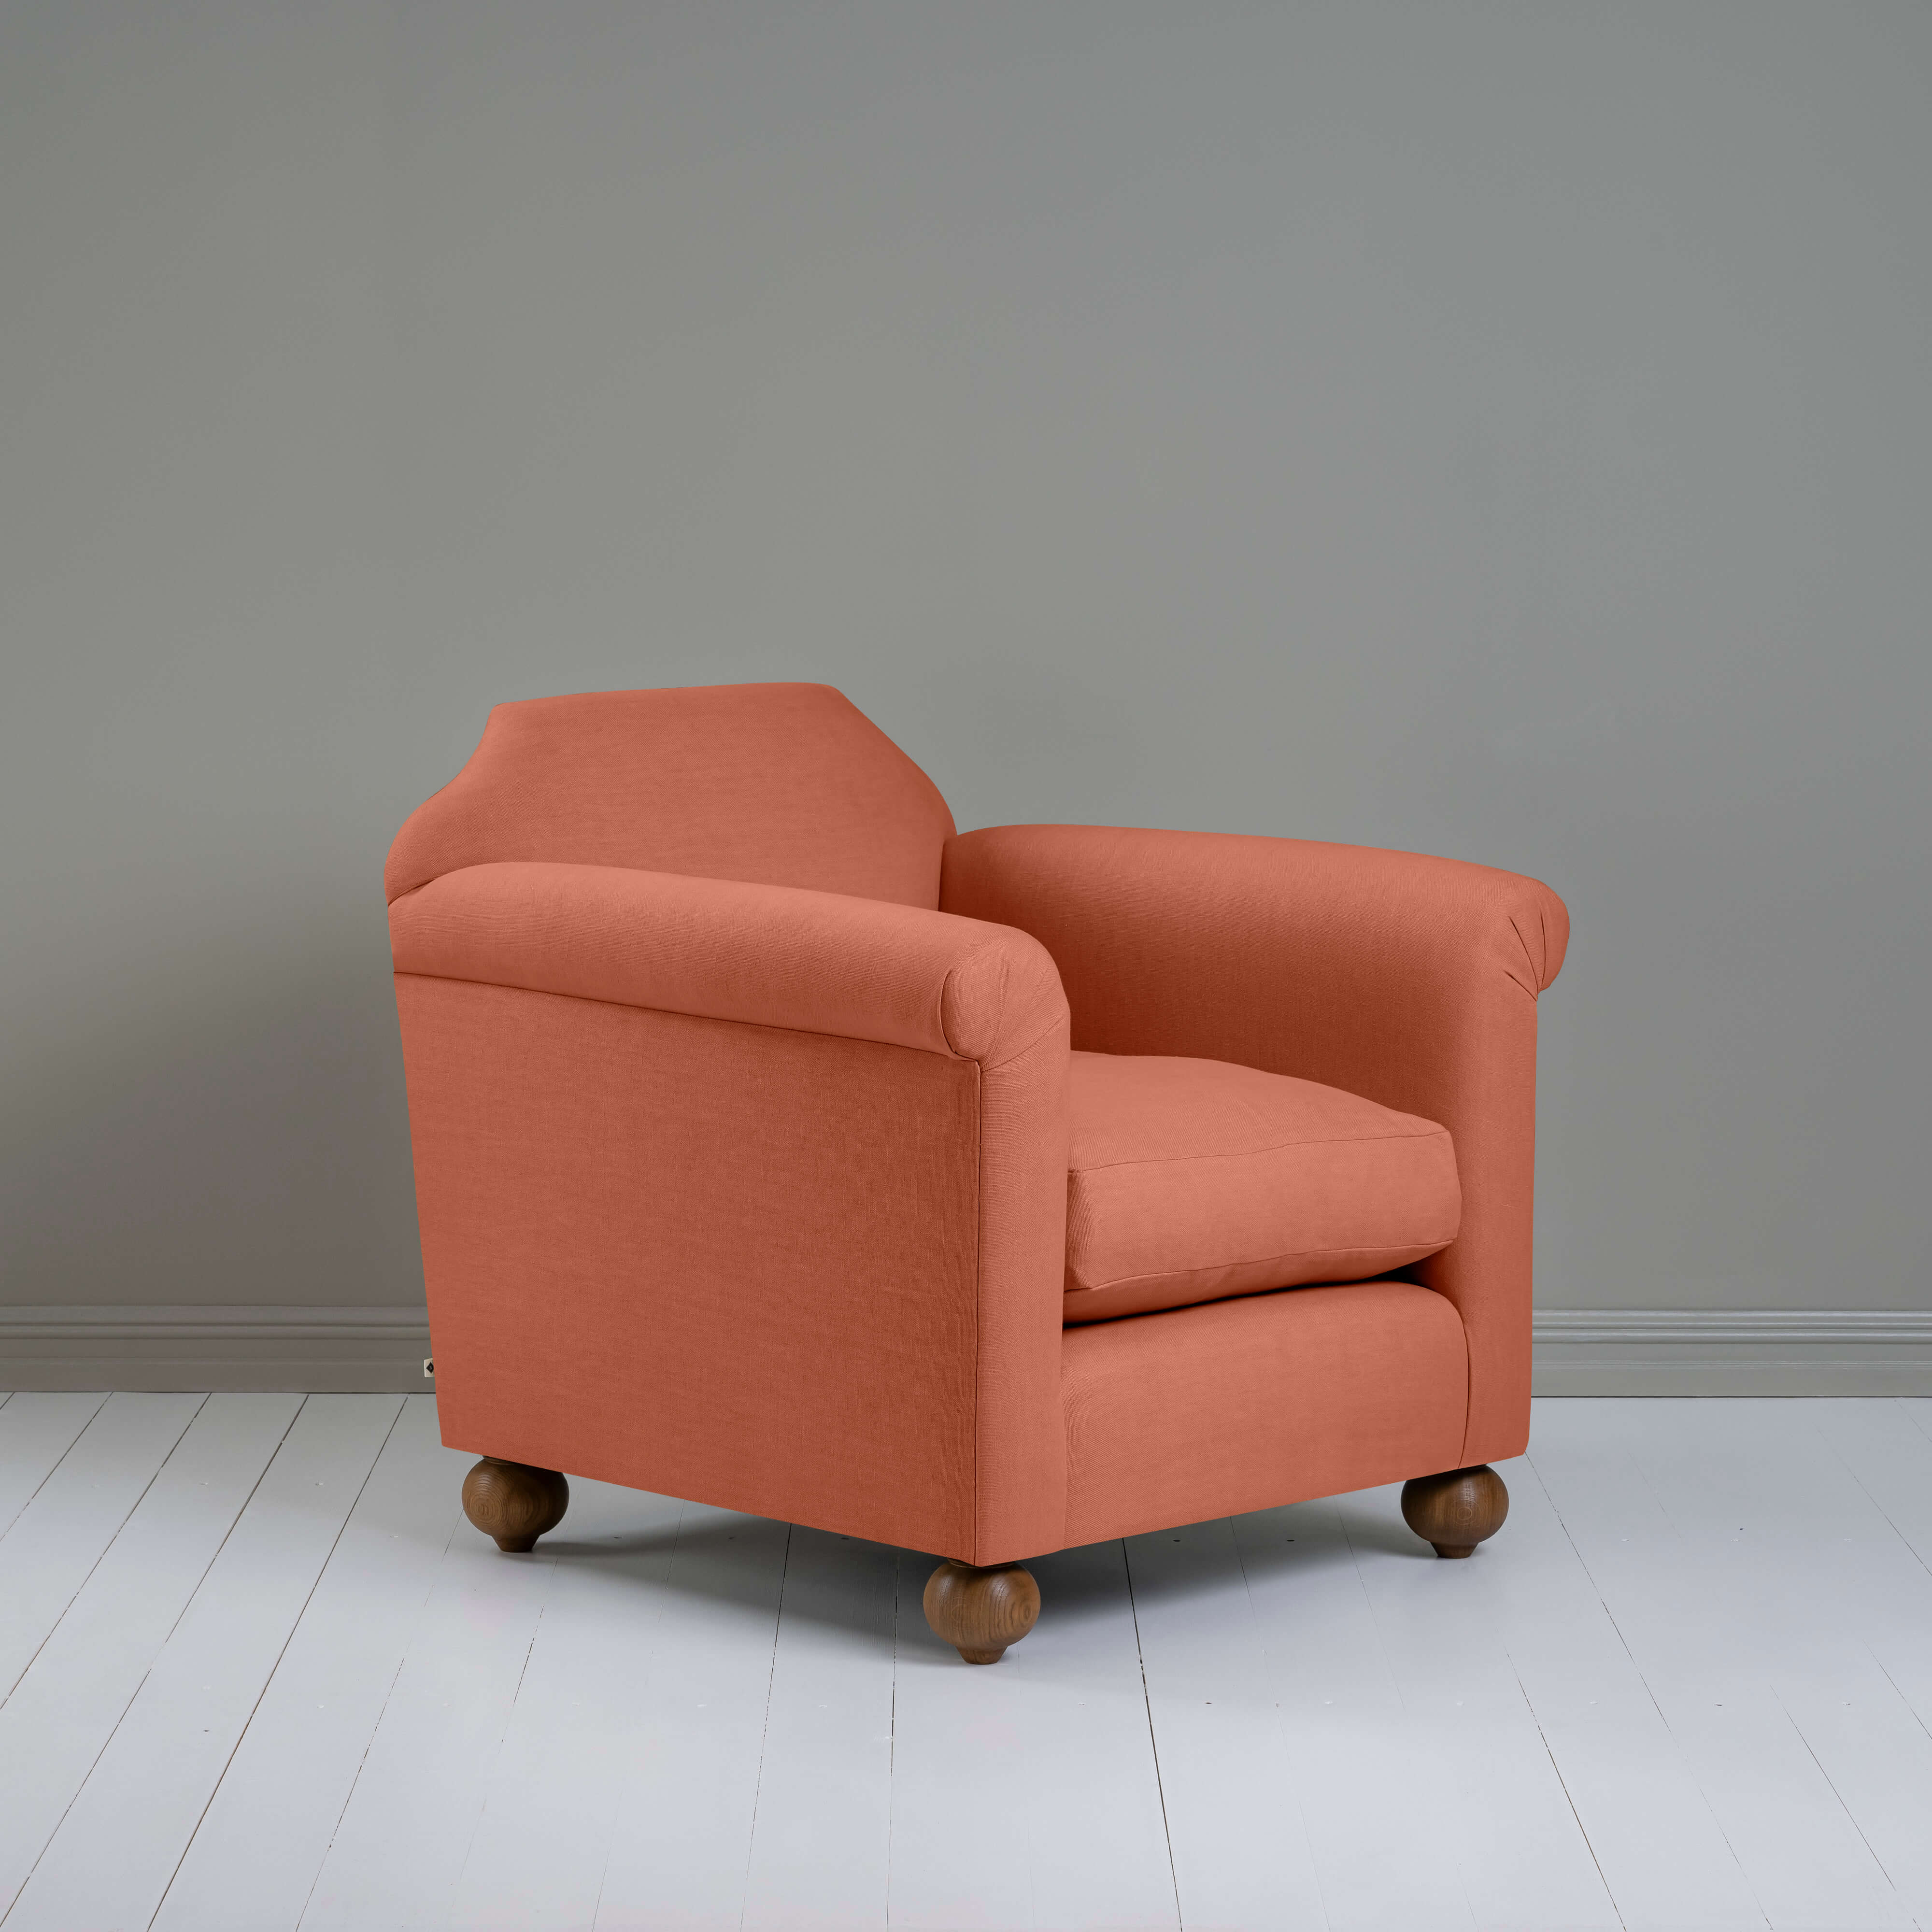  Dolittle Armchair in Laidback Linen Cayenne 